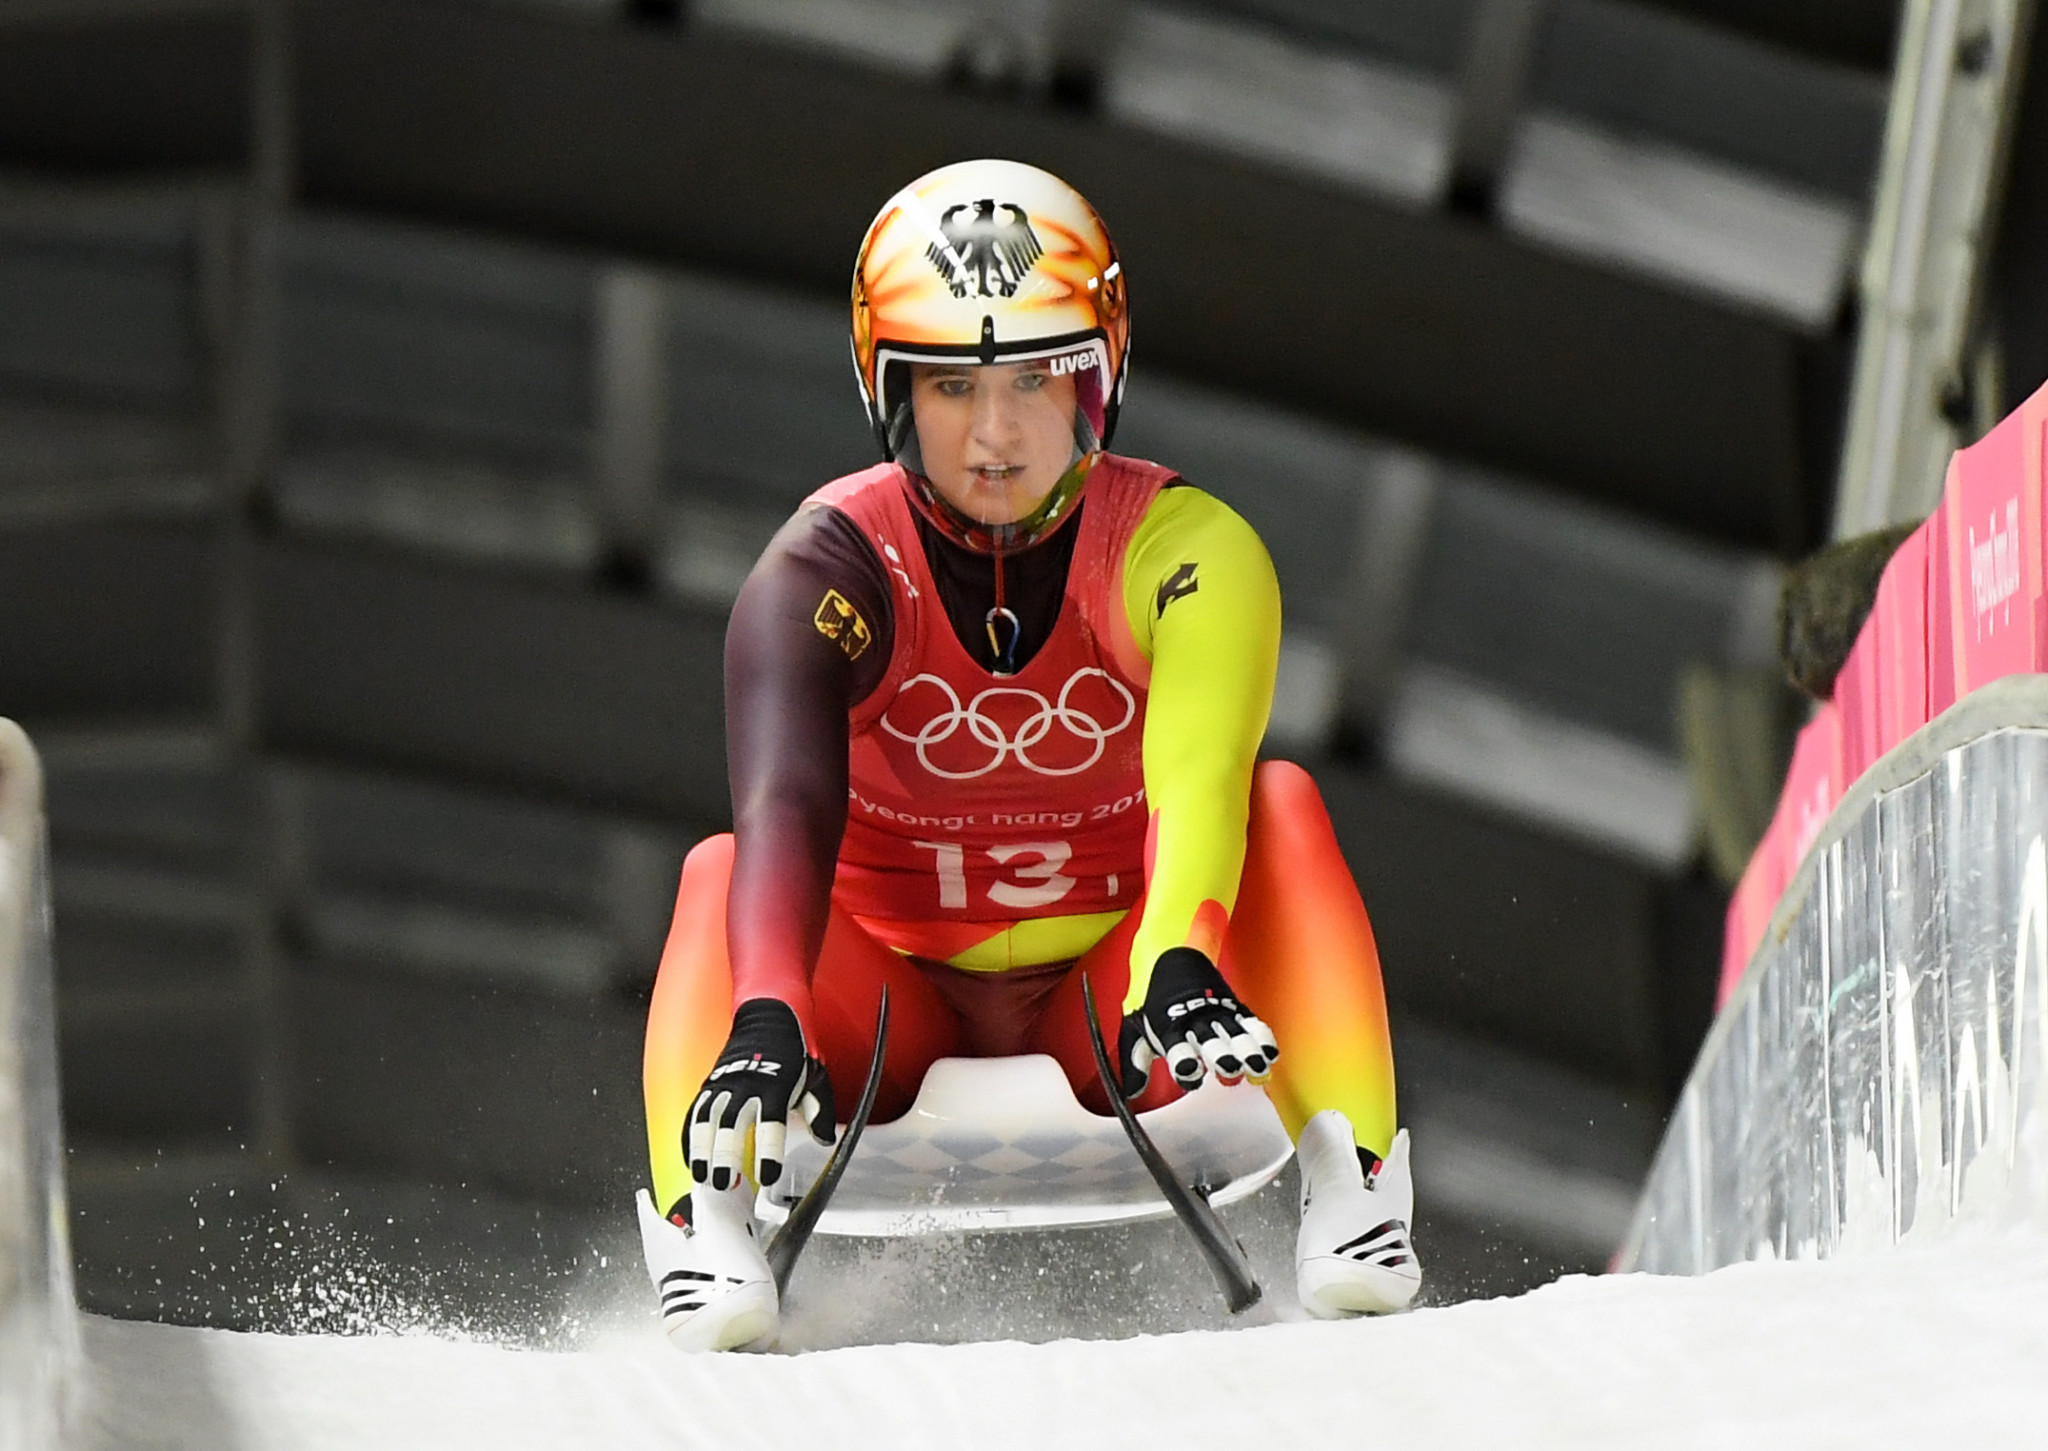 Germany set to dominate luge as Geisenberger eyes fifth gold at Beijing 2022